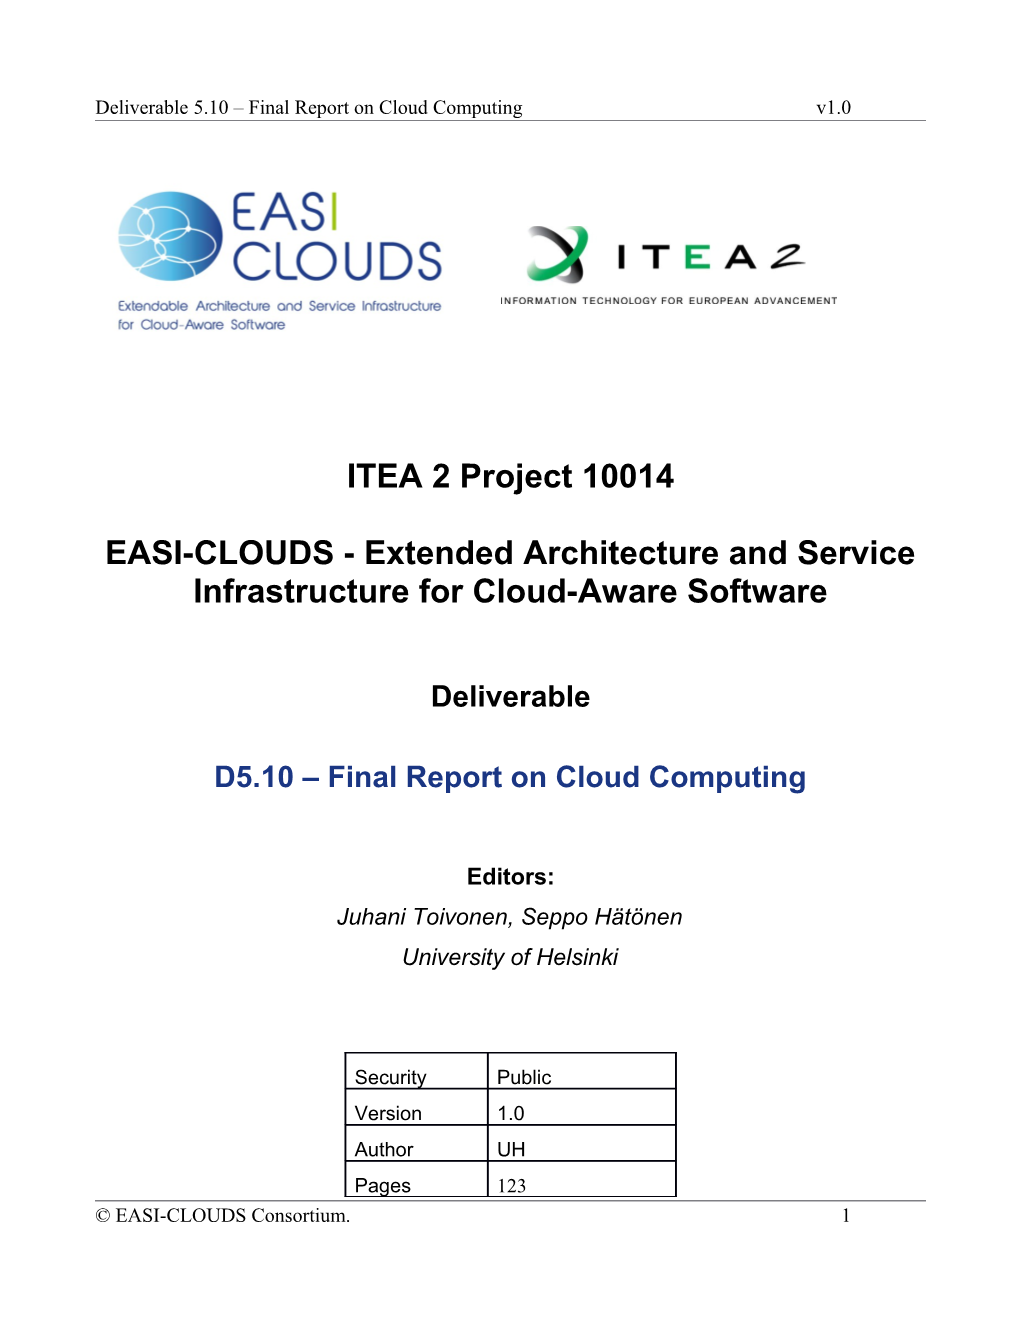 EASI-CLOUDS - Extended Architecture and Service Infrastructure for Cloud-Aware Software